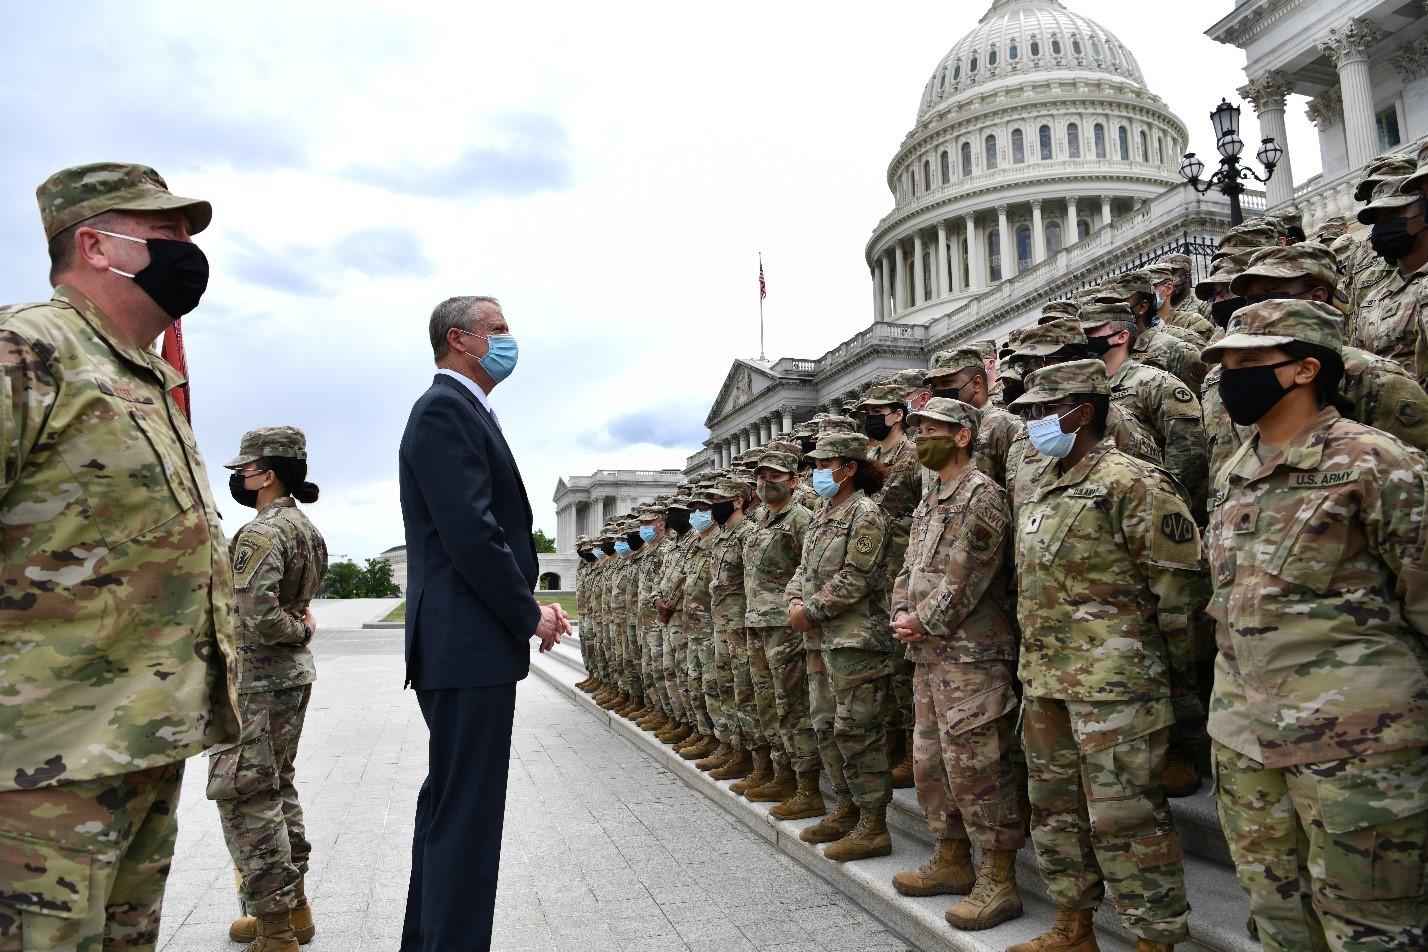 Gov. Baker with National Guard in Washington, DC